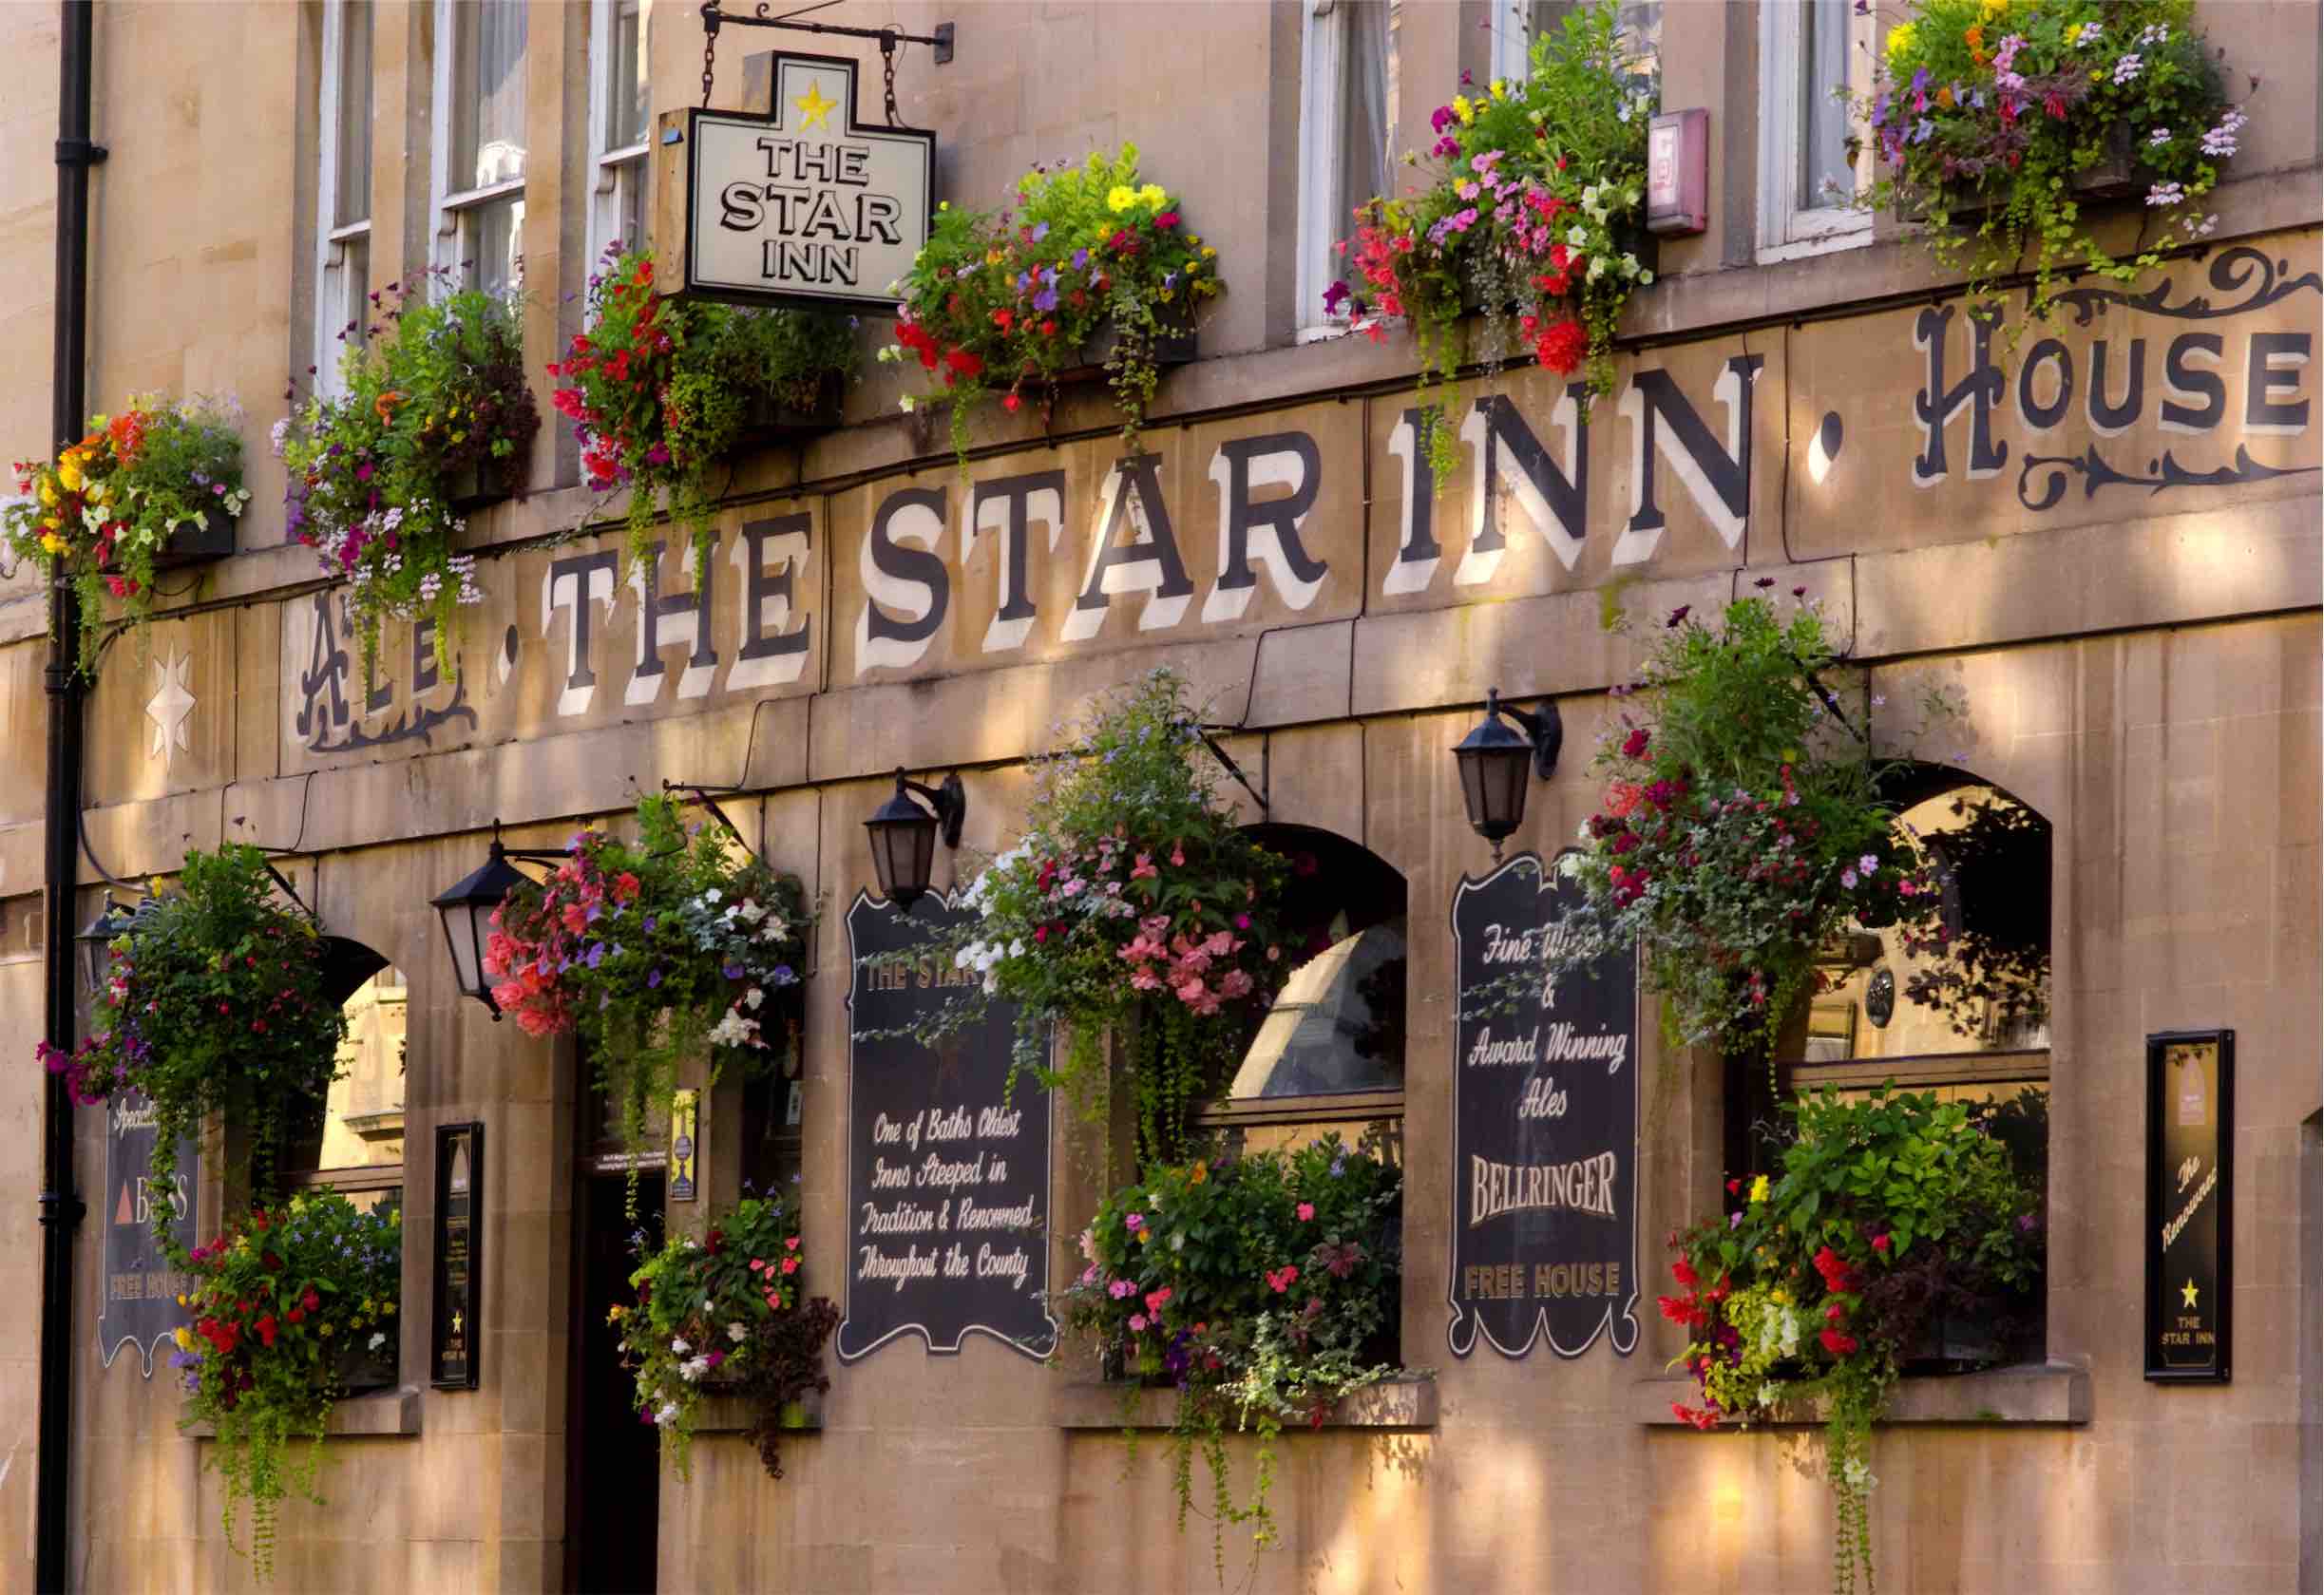 Very close up shot of a building facade with flowers and lettering which says "The Star Inn House"